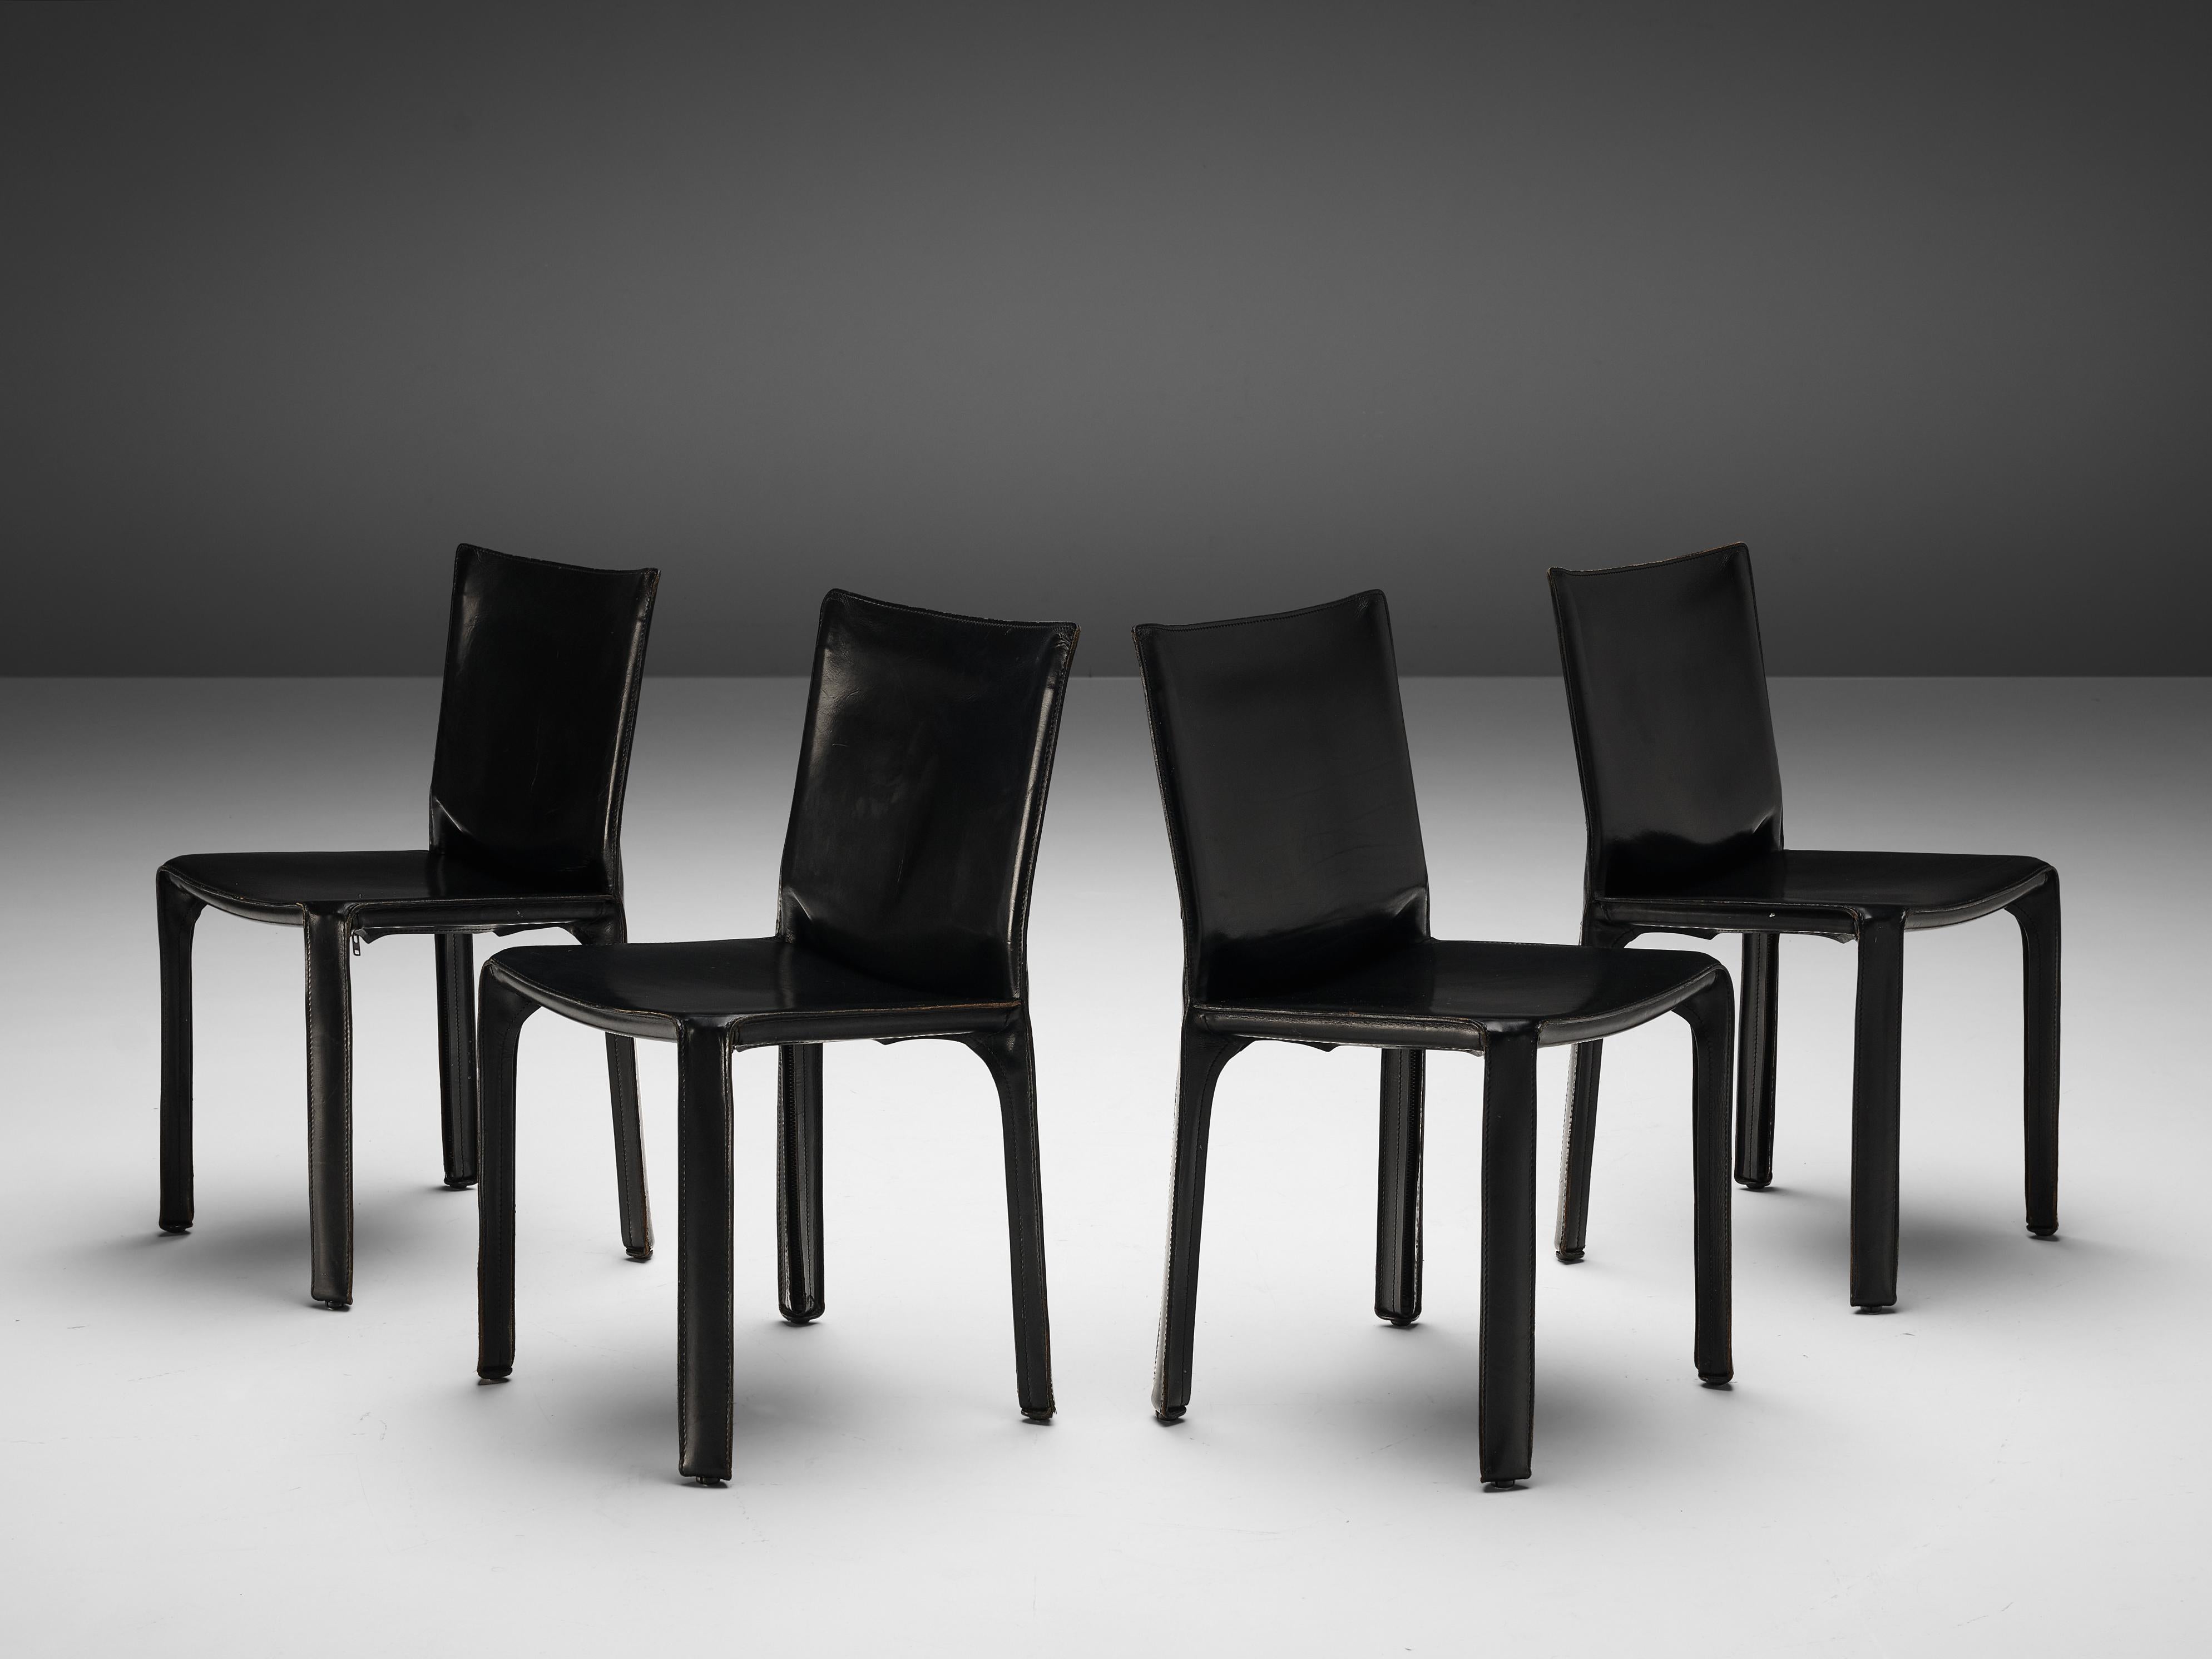 Mario Bellini for Cassina, set of four 'cab' dining chairs model 412, black leather, Italy, 1976

Set of four chairs designed by Mario Bellini for Cassina in 1976. Conceptually, the 'Cab' chair was designed to become marked and shaped over time by